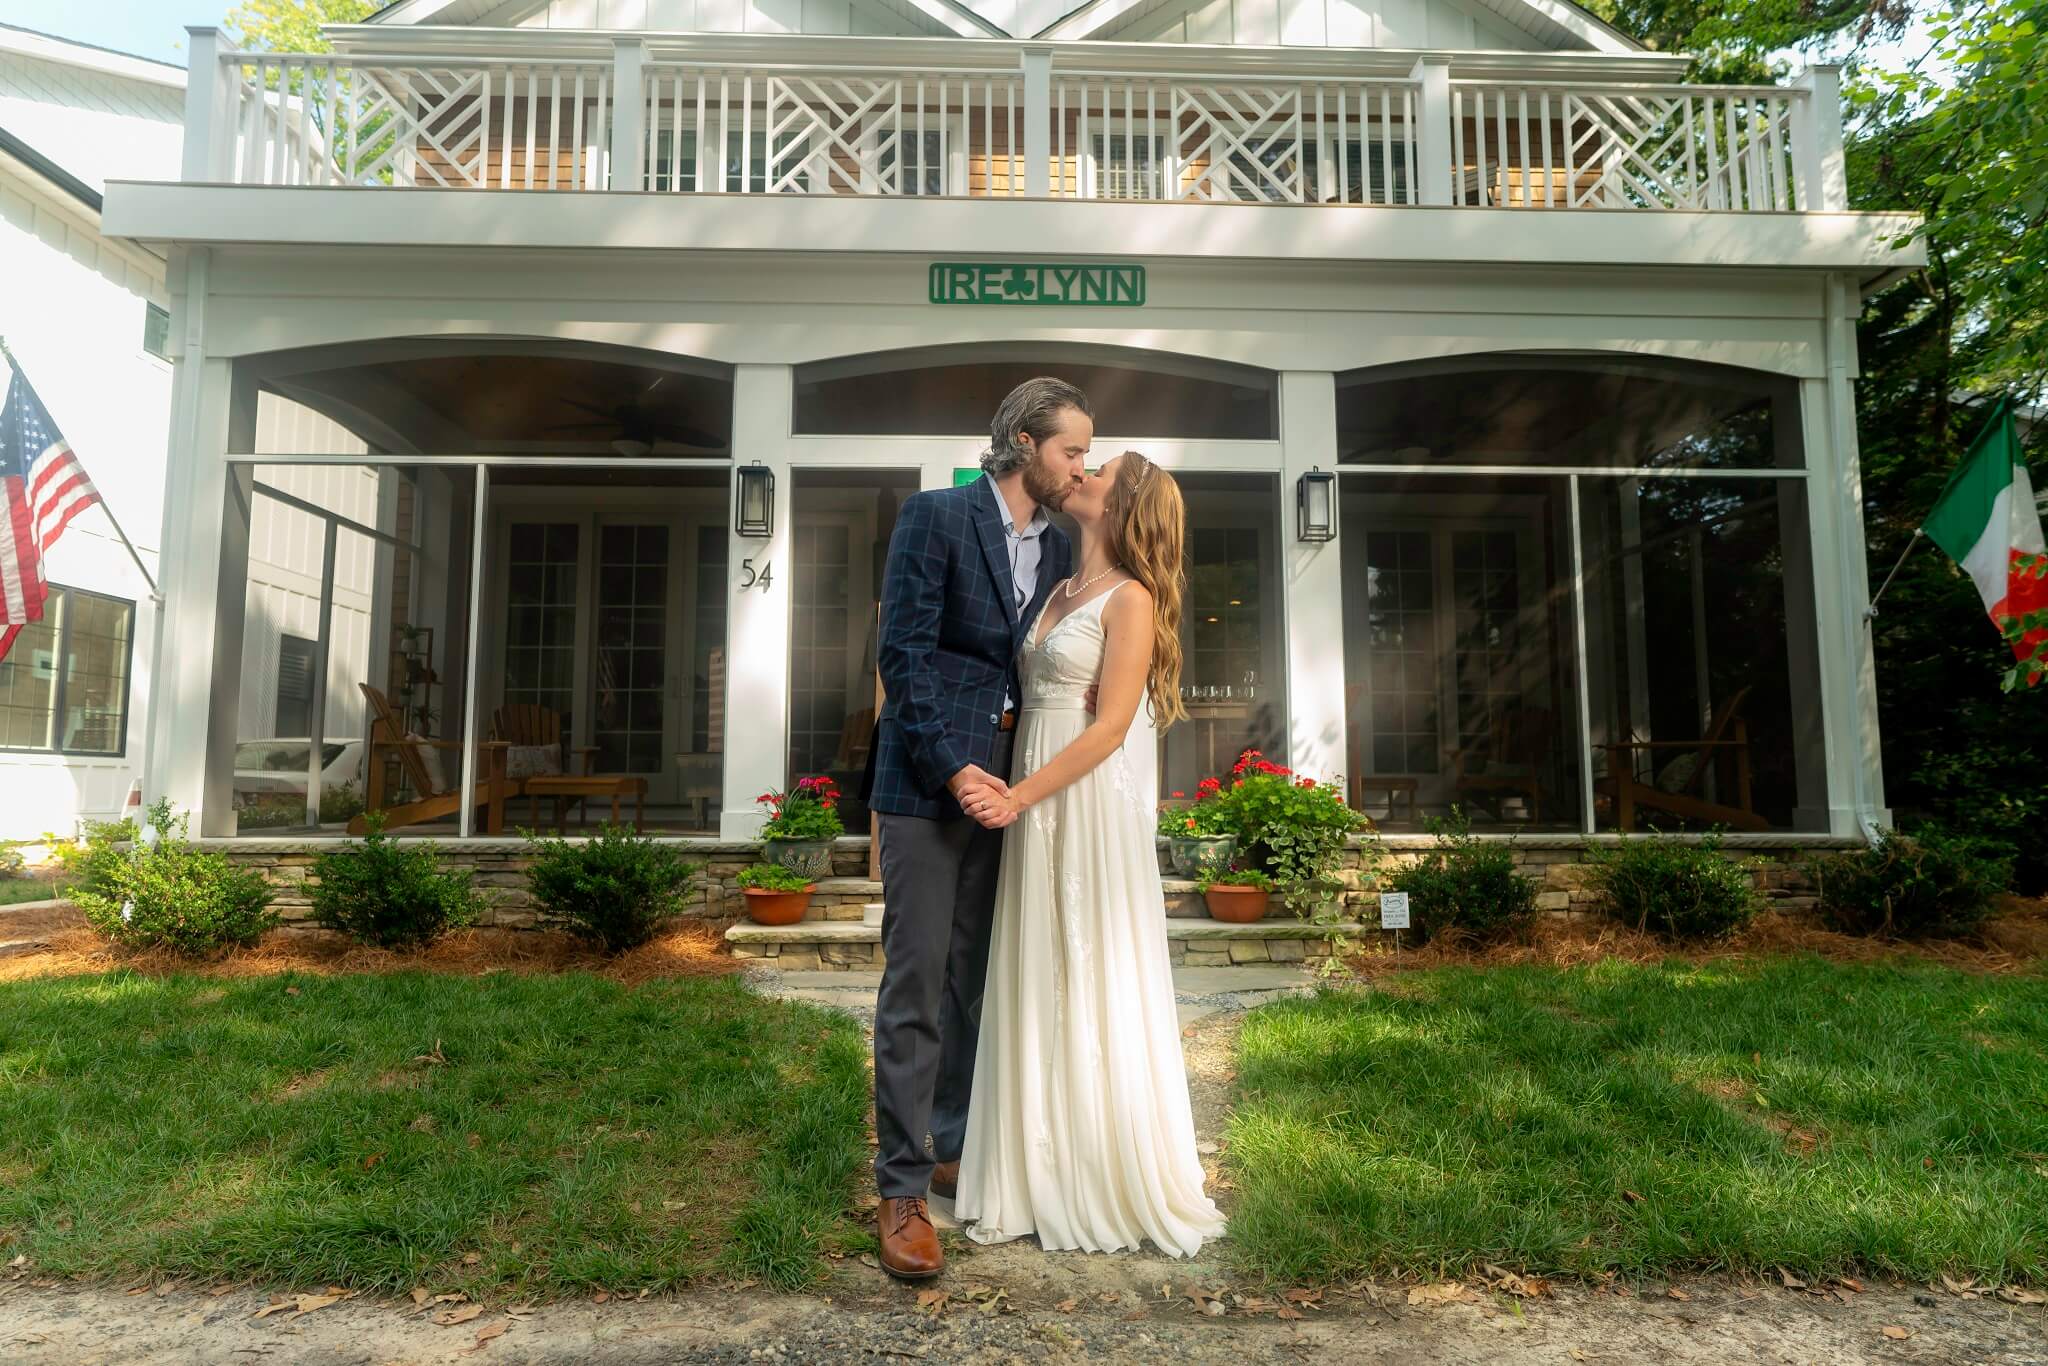 Bride and groom kissing outside their home in a residential neighborhood